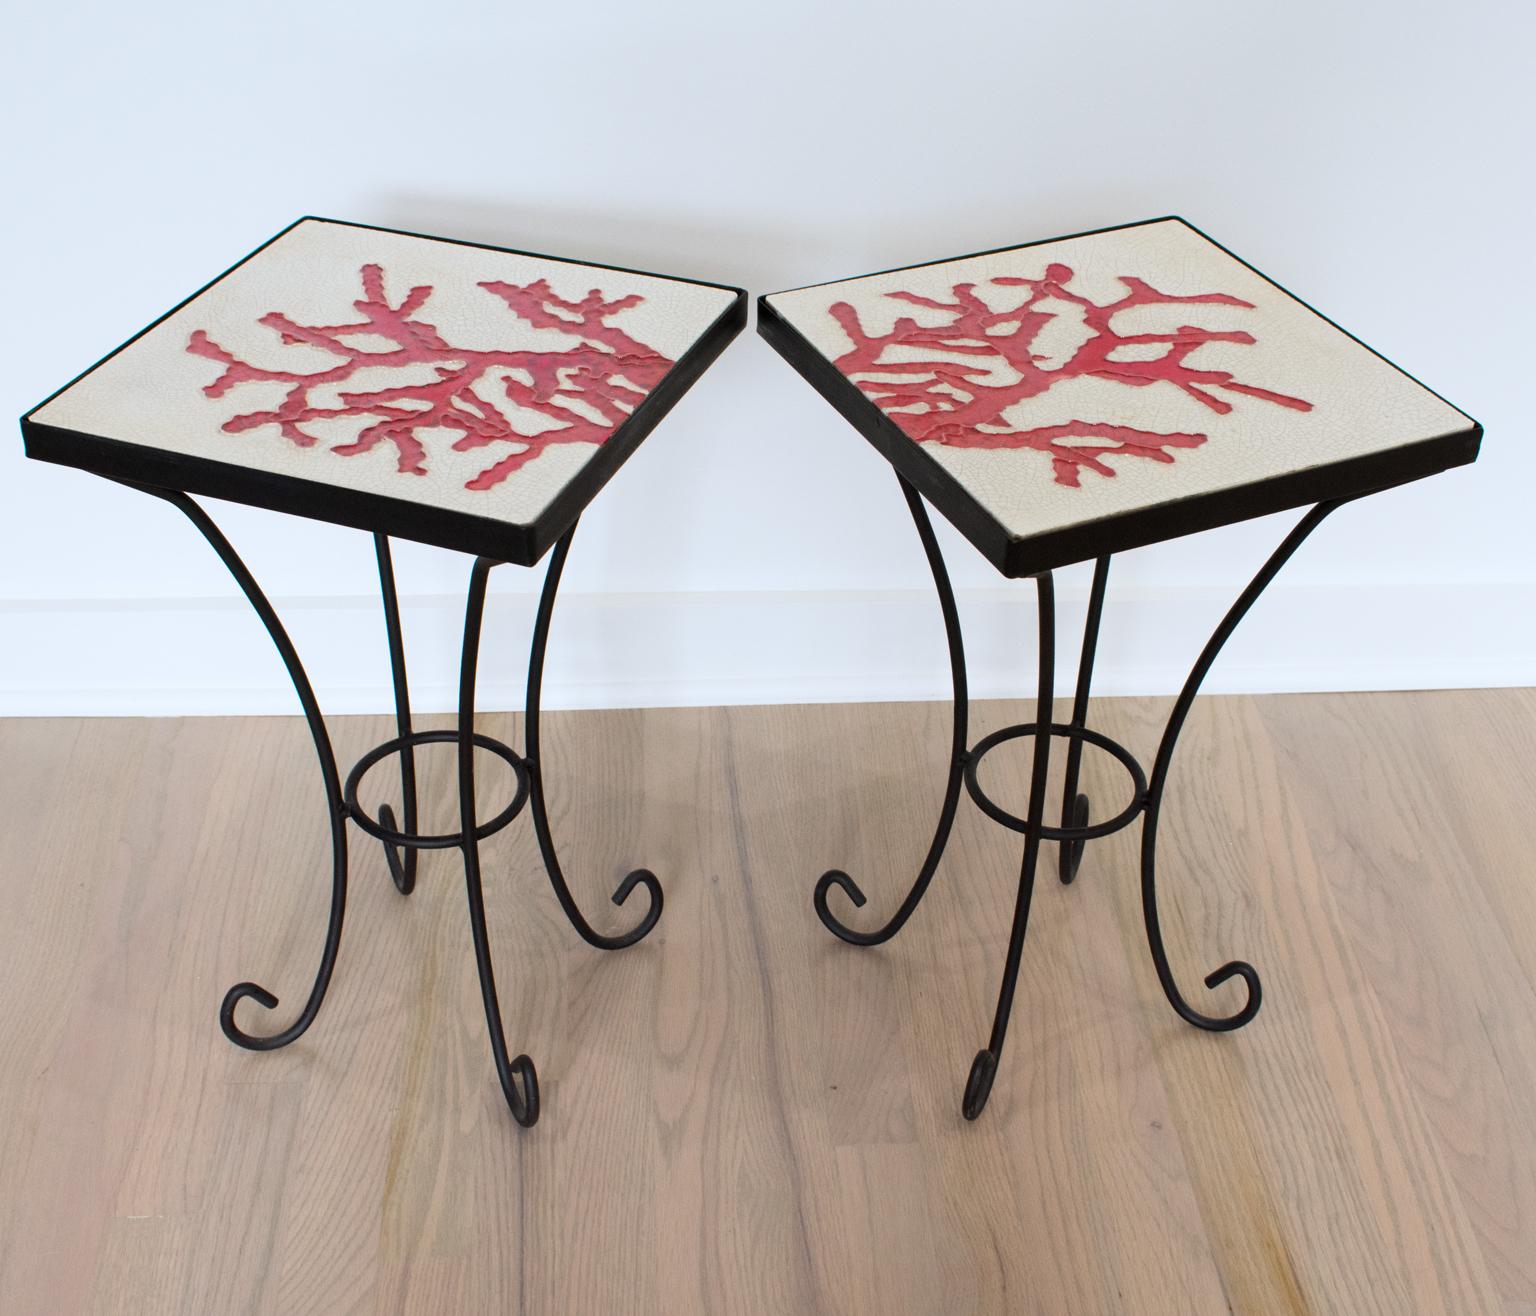 Wrought Iron and Ceramic Tile Side Coffee Table, a pair, 1950s For Sale 4